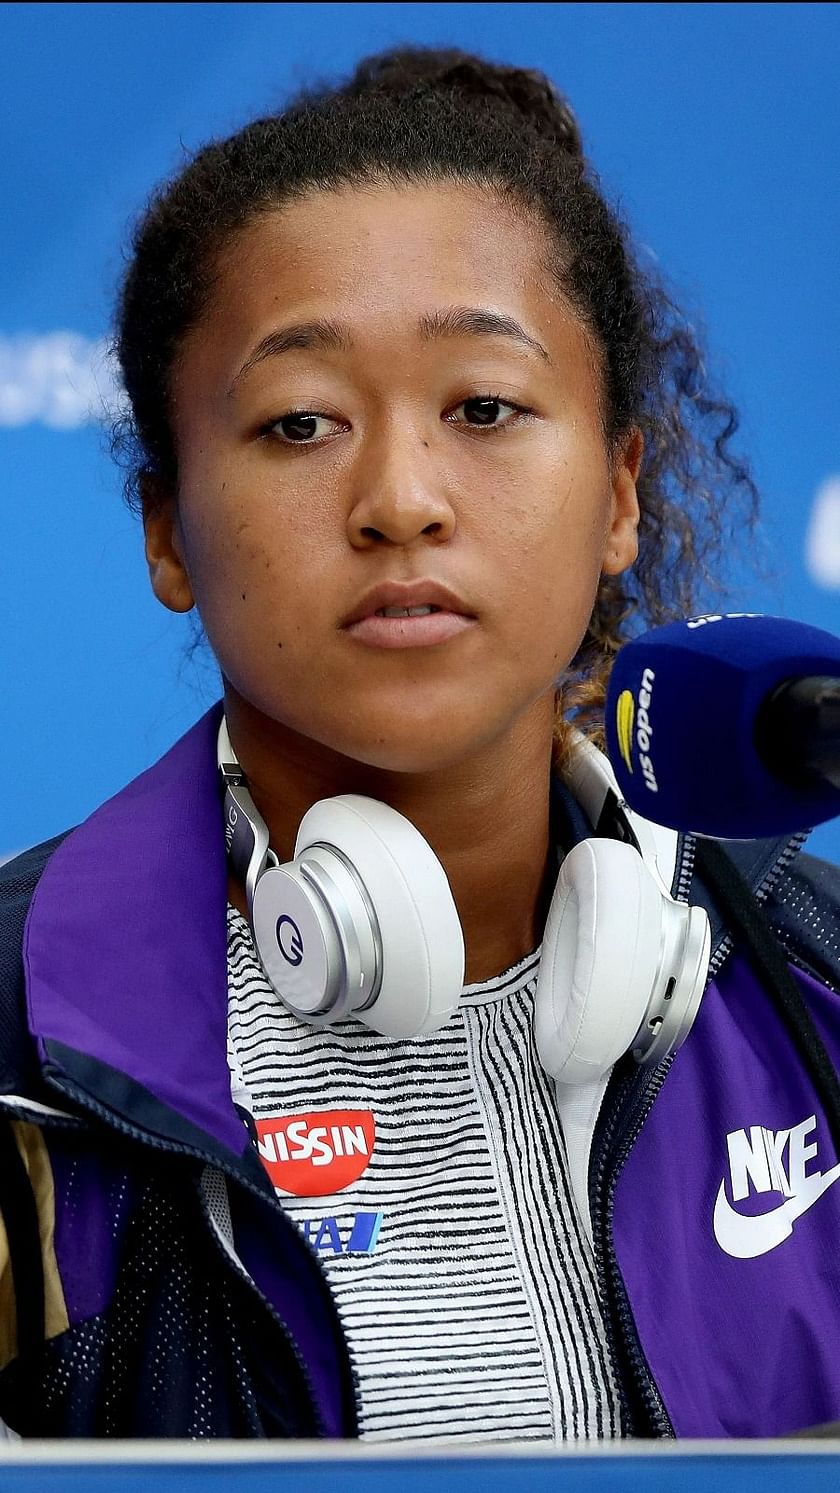 Naomi Osaka's sister says clay-court criticism prompted media boycott: 'Her  confidence was completely shattered